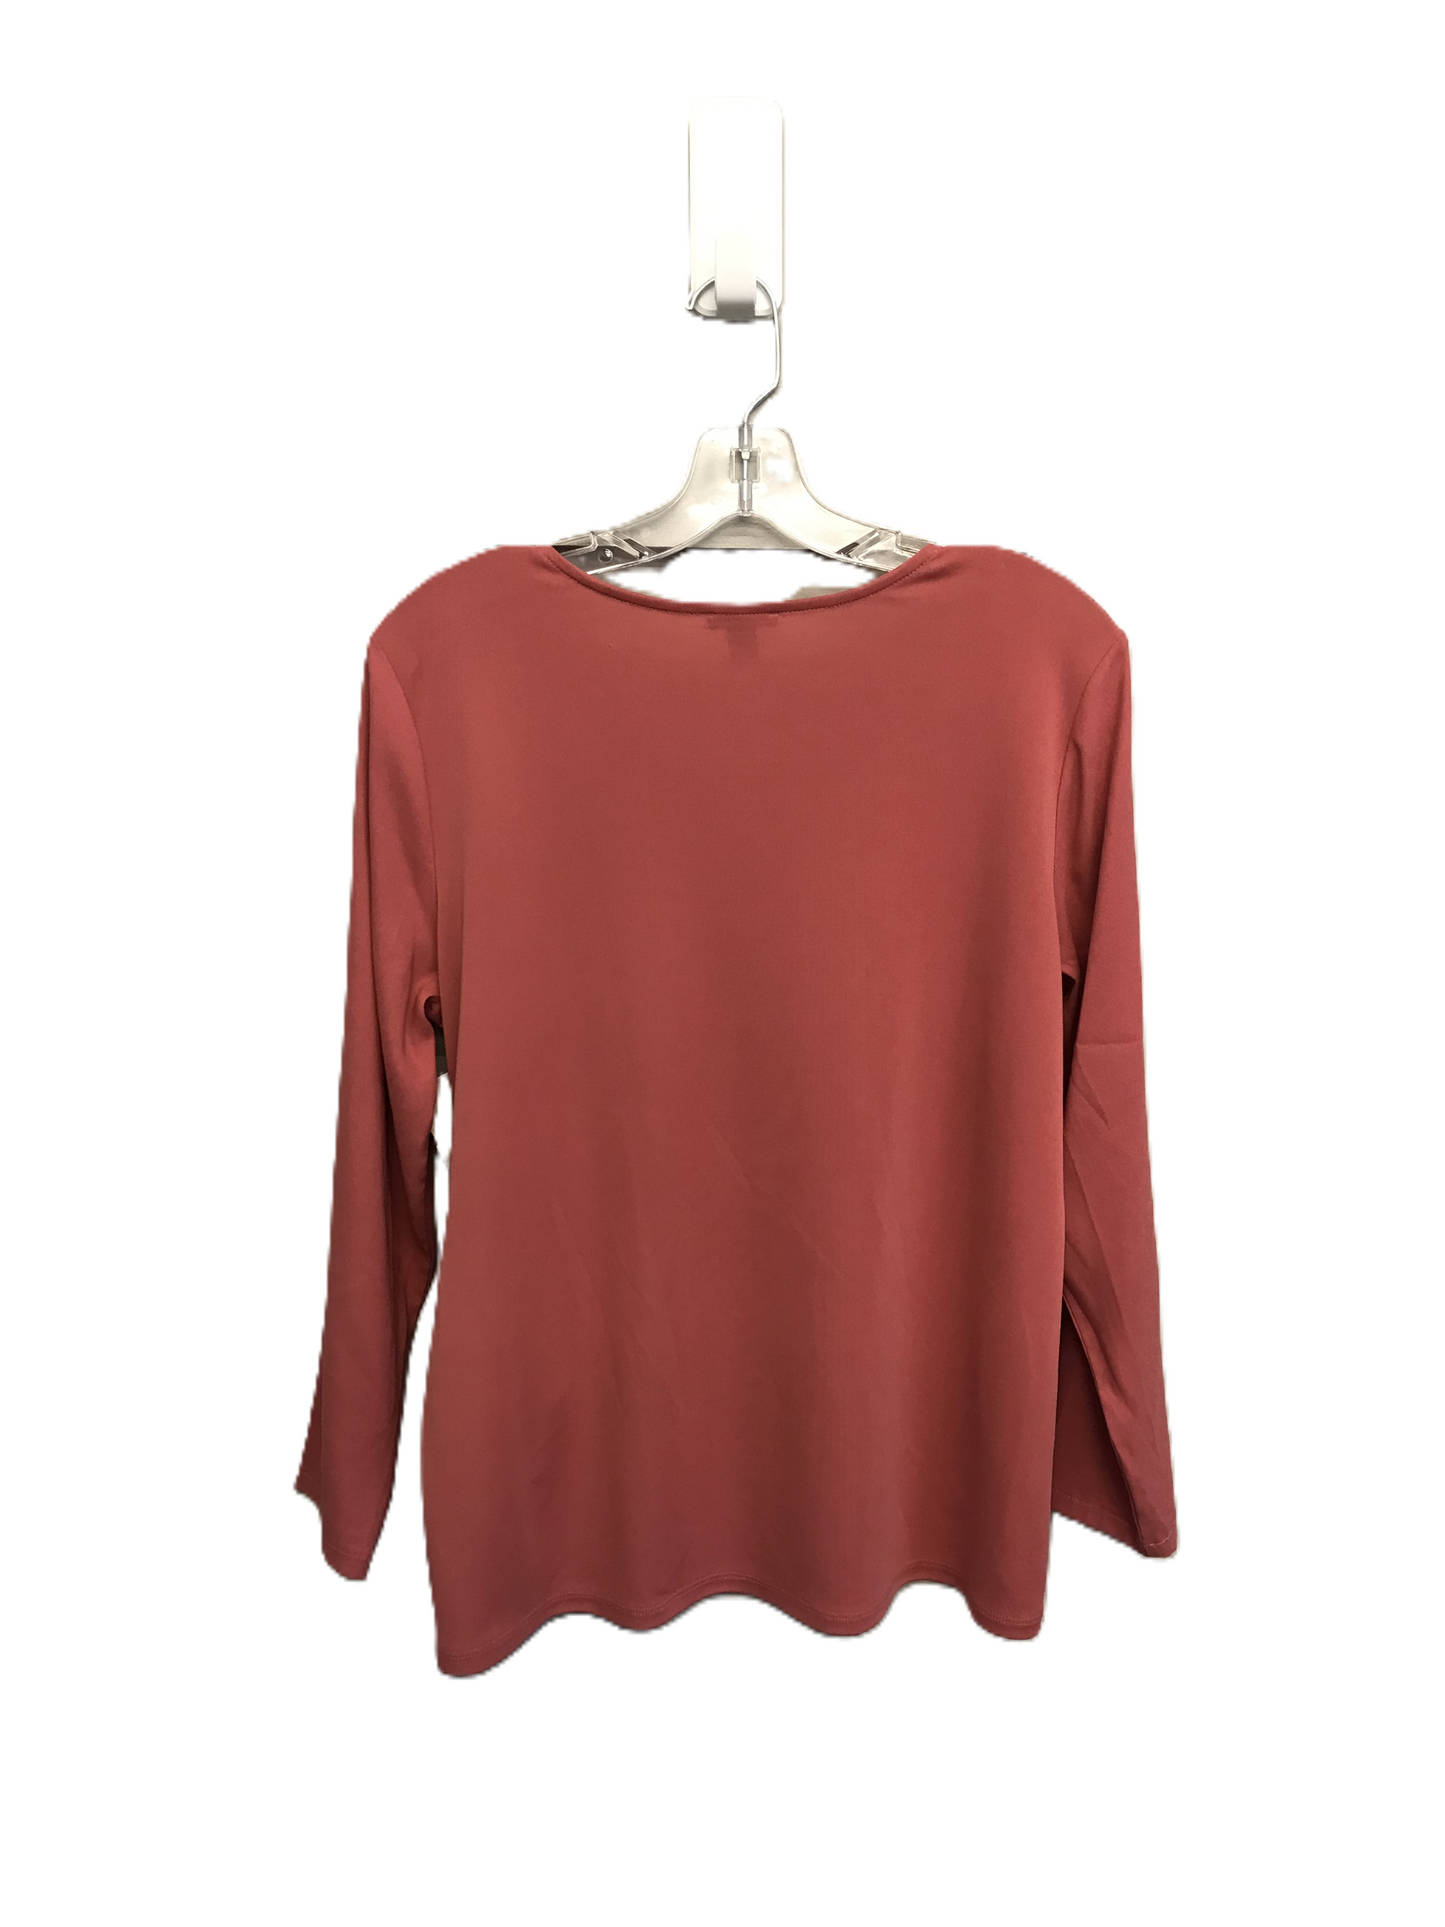 Pink Top Long Sleeve By Ann Taylor, Size: M